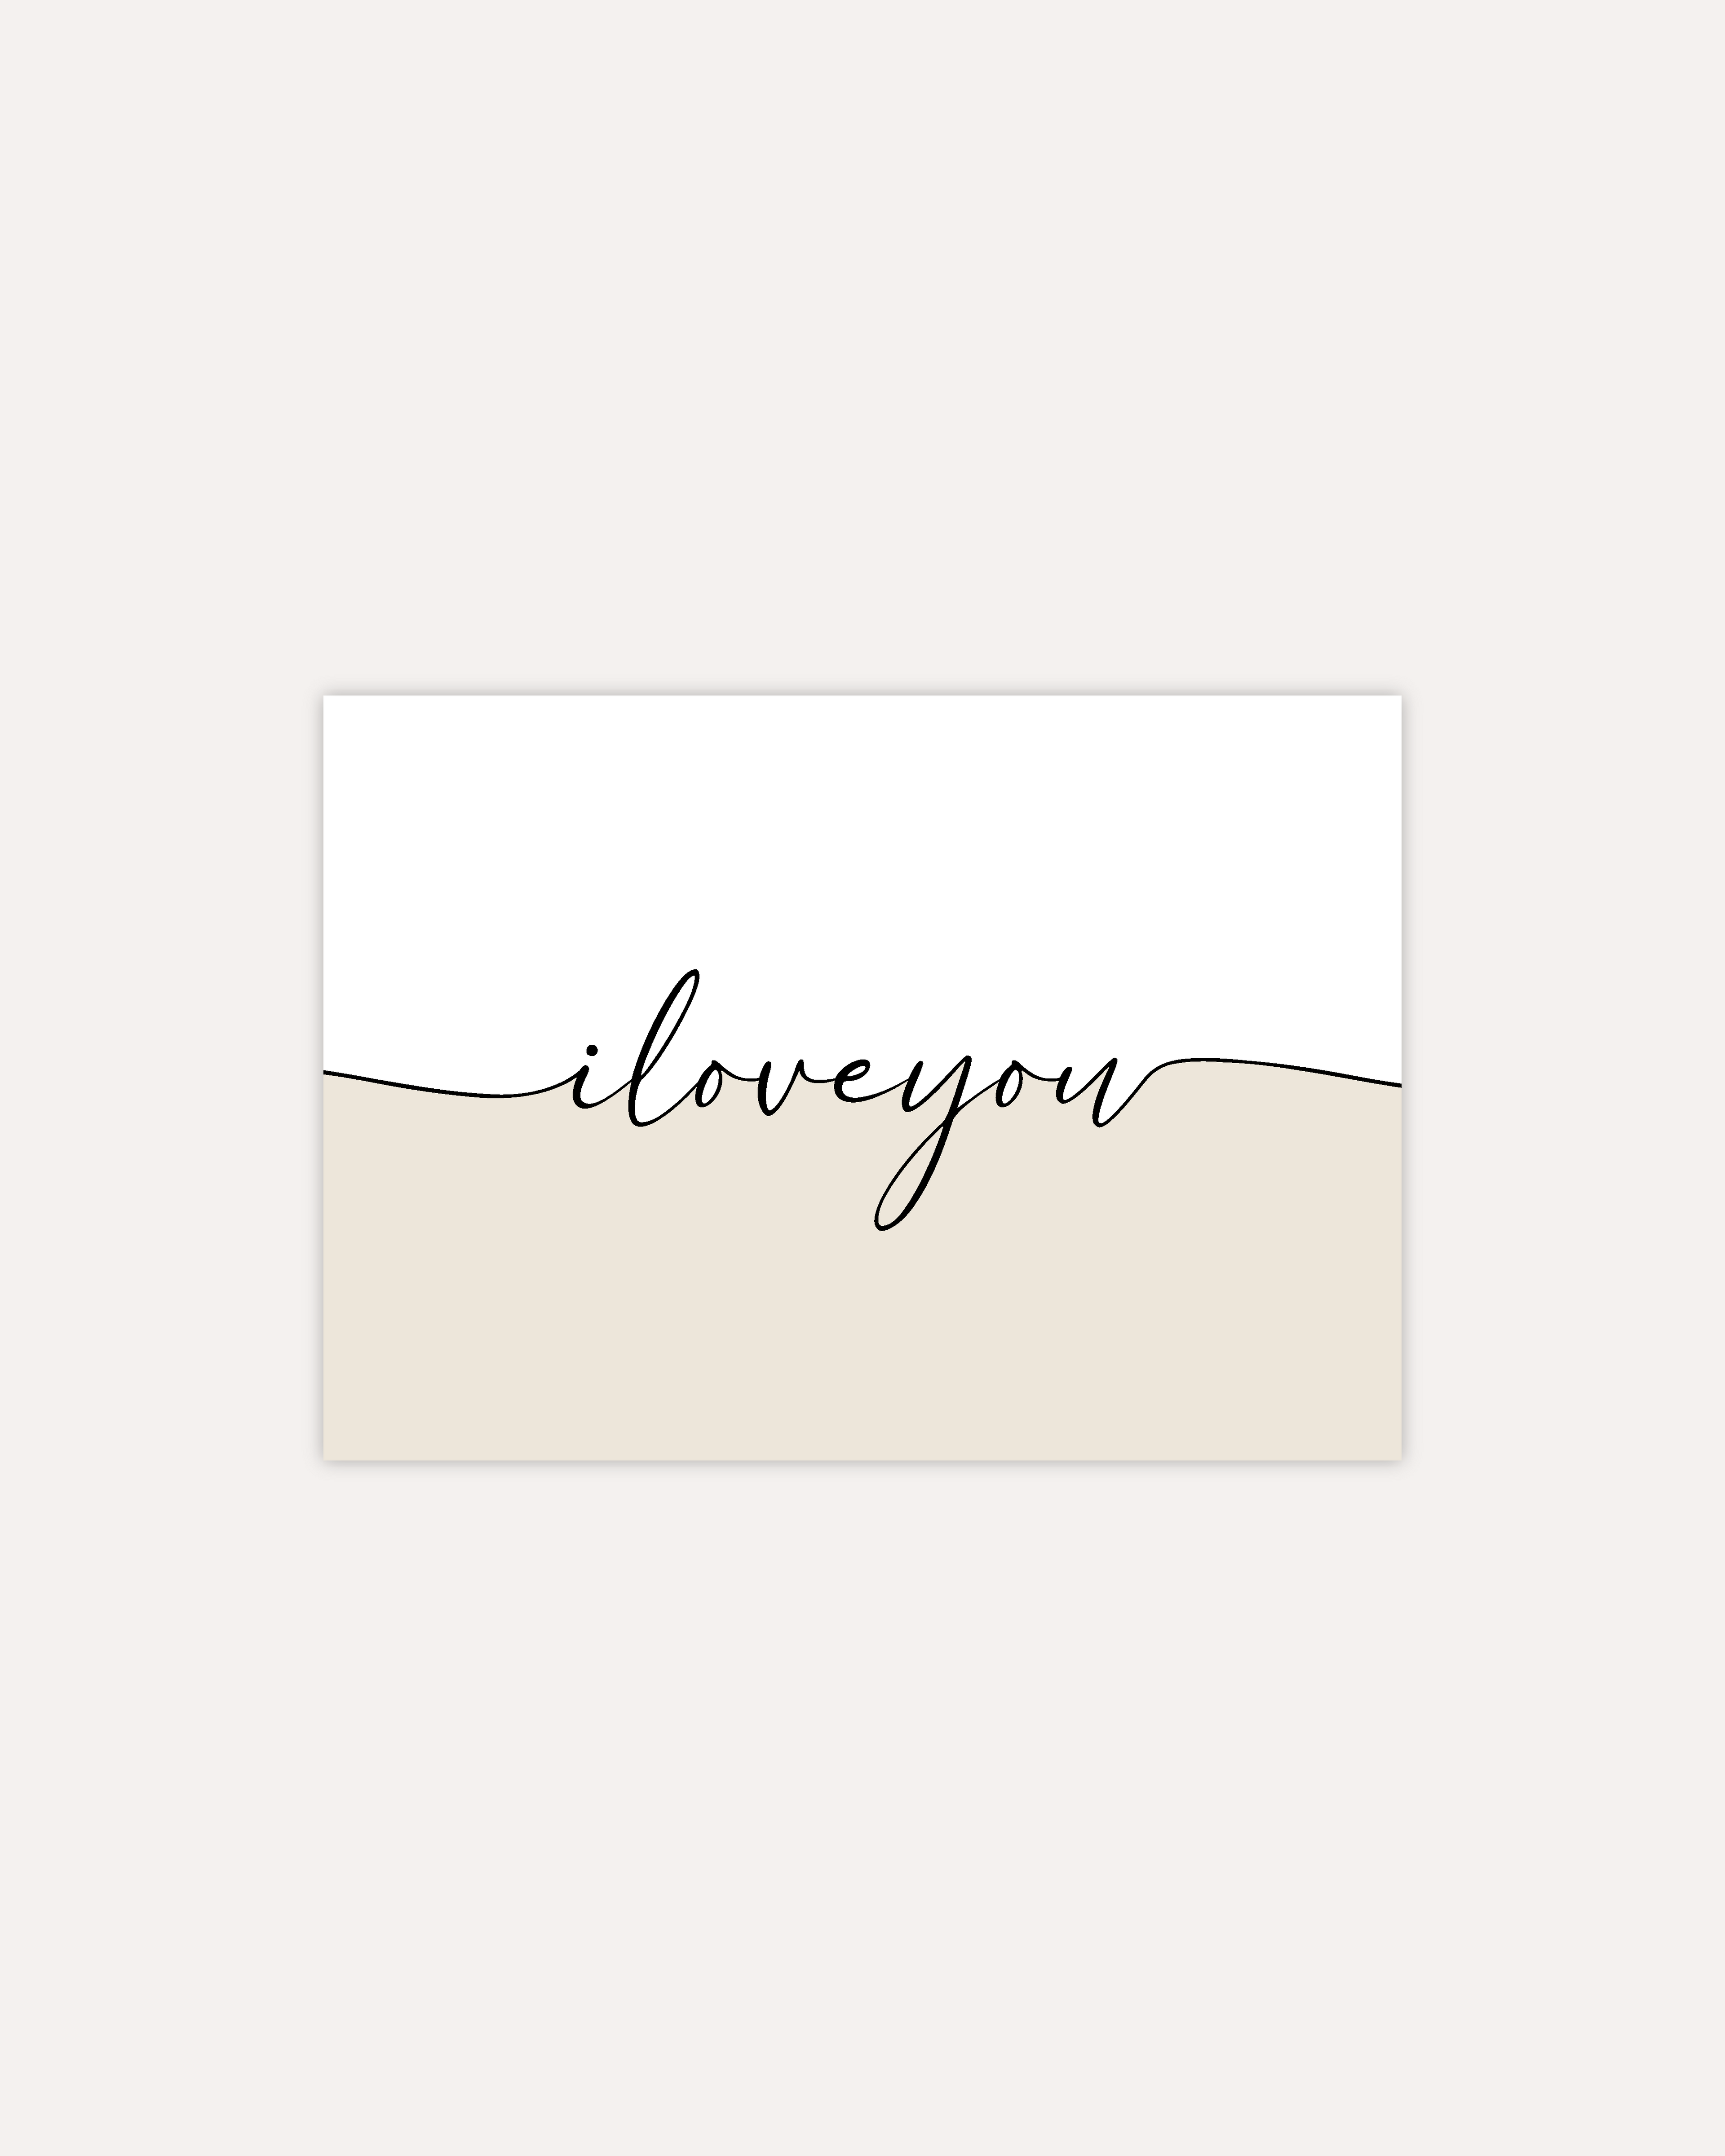 A postcard design reading &quot;I love you&quot; in black cursive writing, that splits the card into two halves. The top half is white and the bottom half is beige. The design is shown on a beige backround.